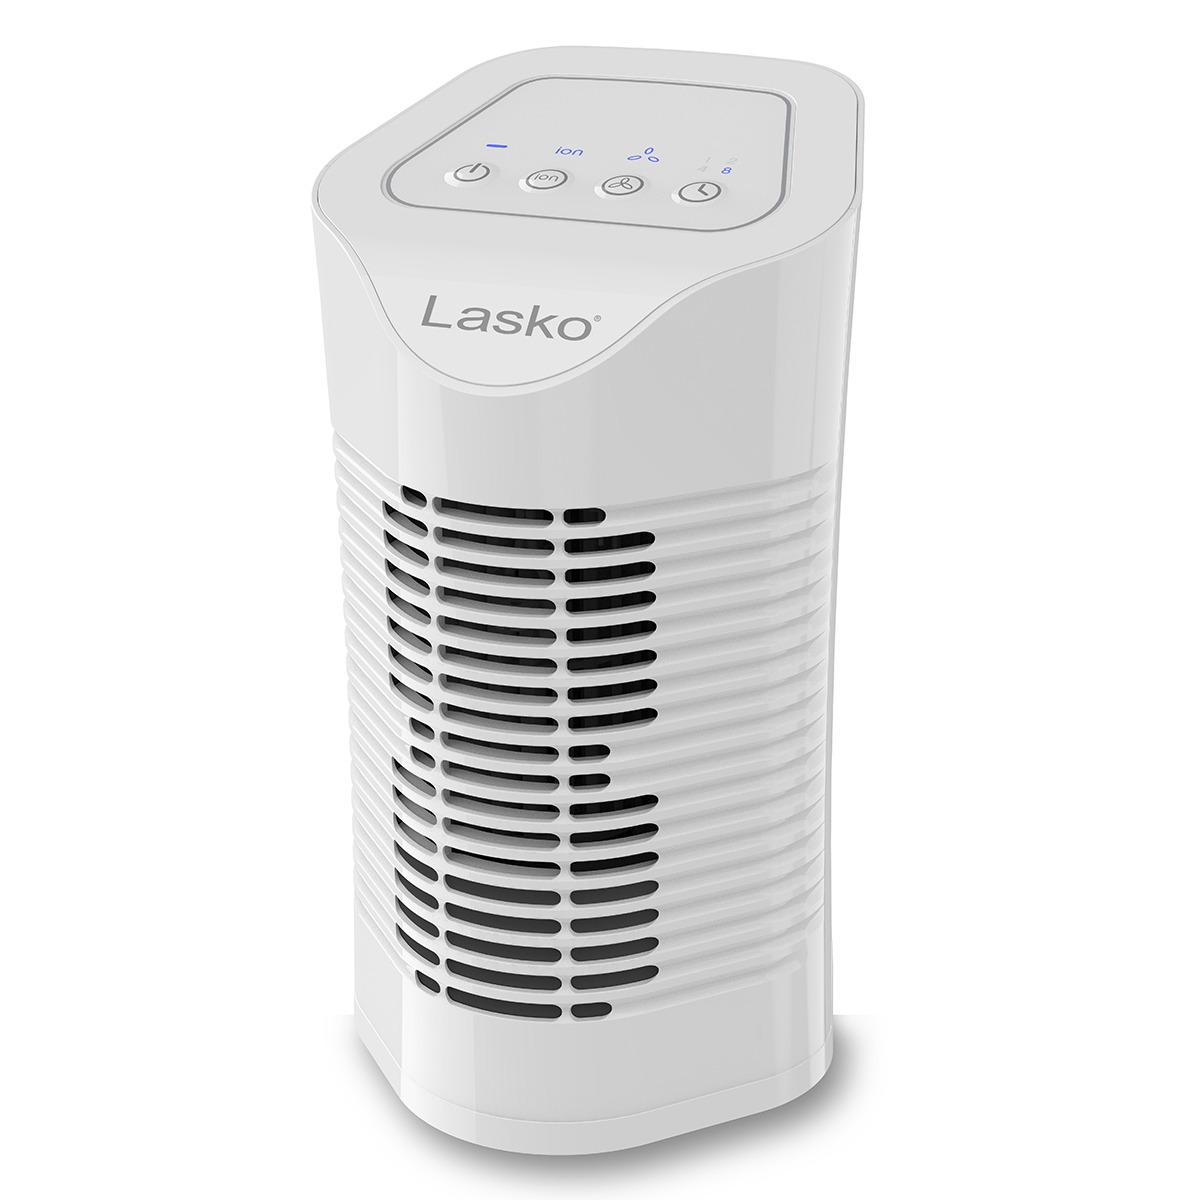 Lasko Desktop Air Purifier with 3-Stage Air Cleaning System Model HF11200